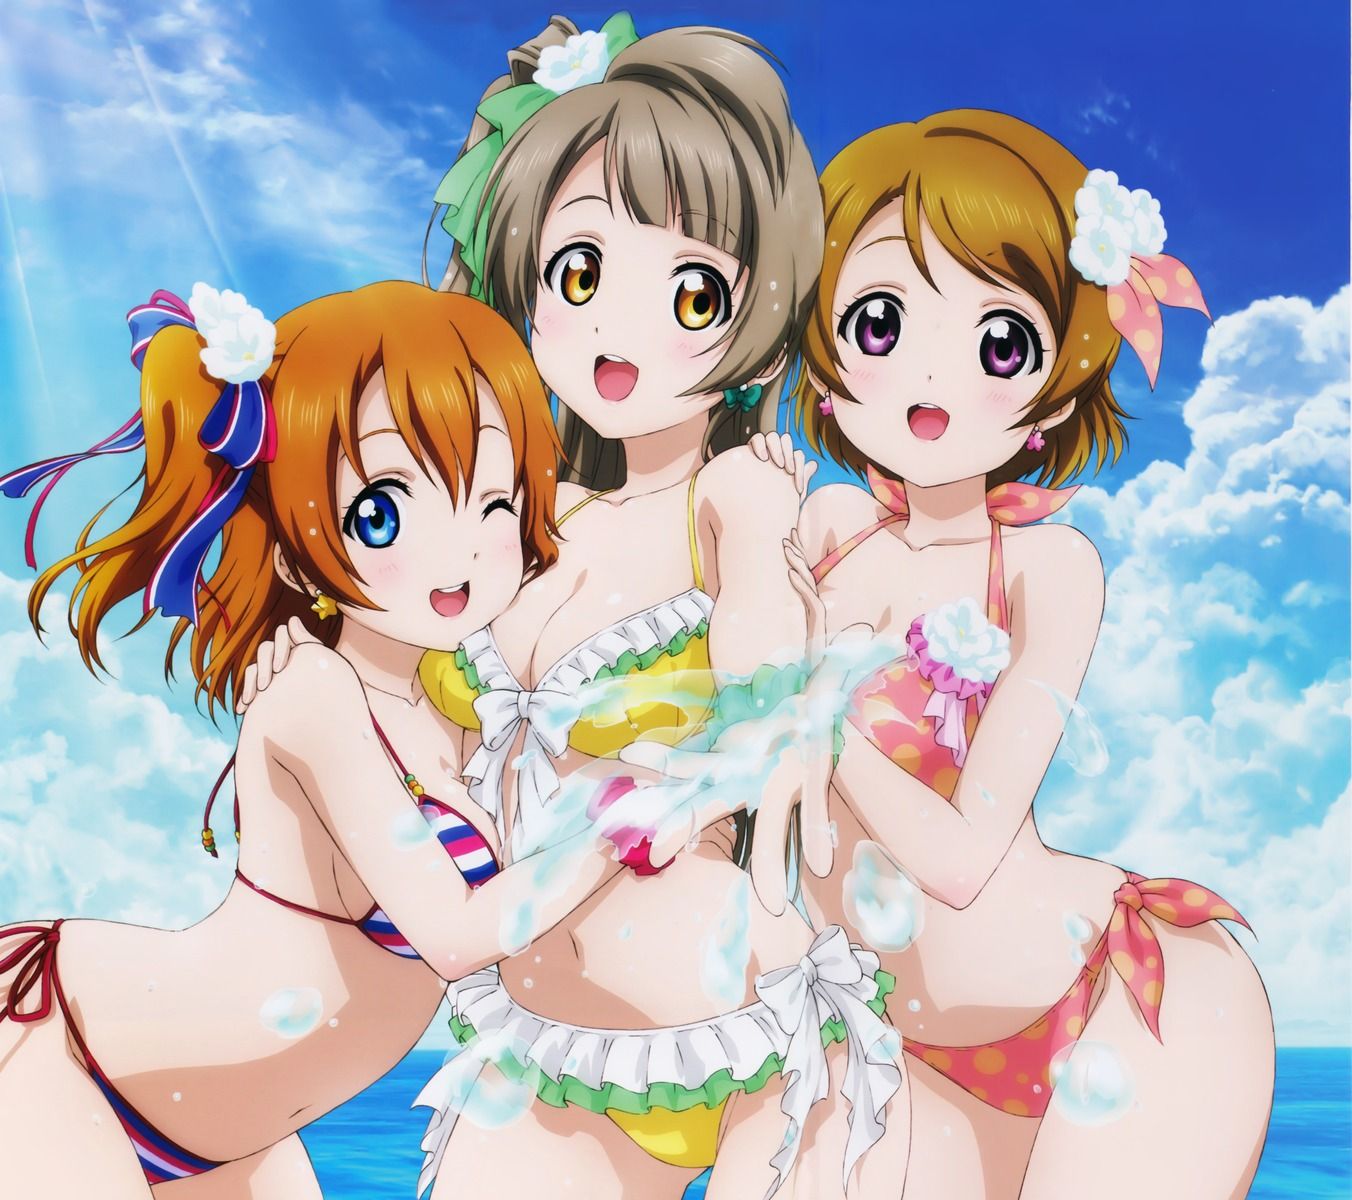 Love live! Wallpaper 05 [15 pictures] 4